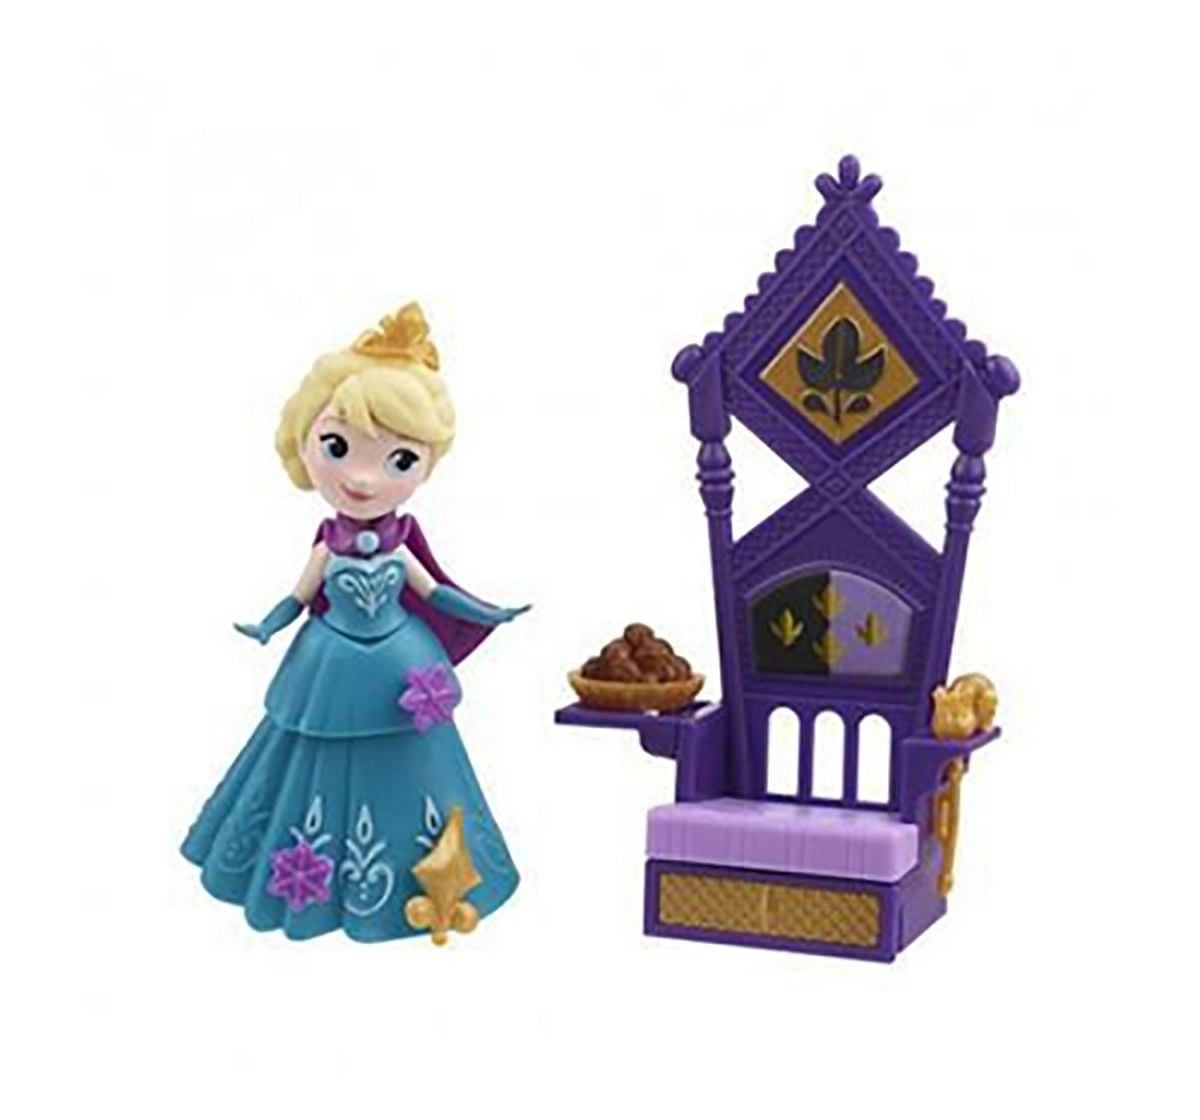 Disney Frozen Little Kingdom Doll And Accessory Assorted Dolls & Accessories for Girls age 4Y+ 